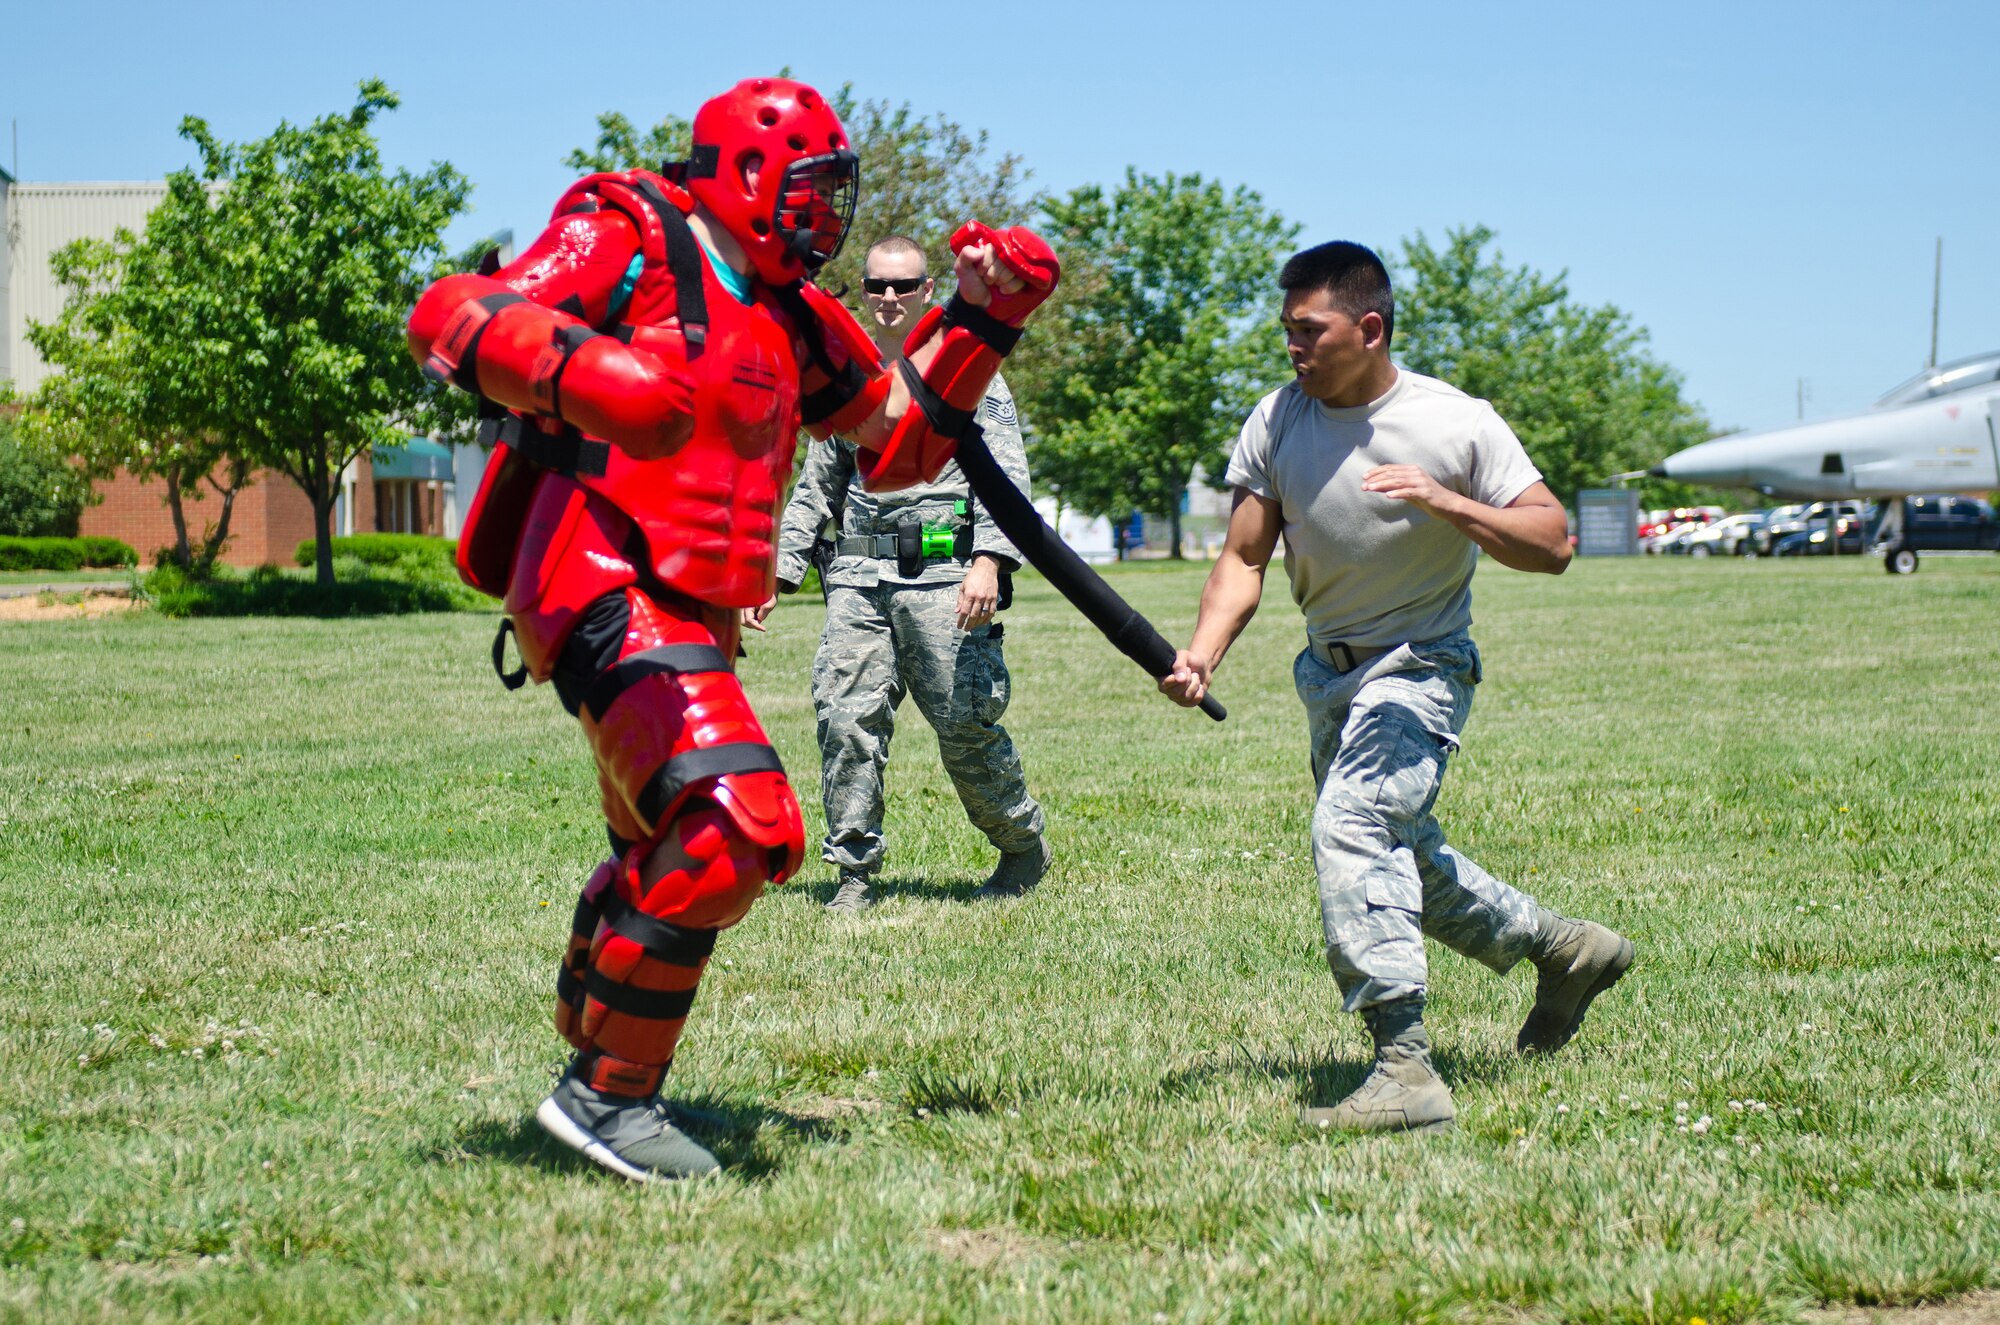 Senior Airman Reymart Relos (right), a services technician for the 123rd Force Support Squadron, attacks a 123rd Security Forces Squadron member during baton training as part of a week-long course for security forces augmentees at the Kentucky Air National Guard Base in Louisville, Ky., May 19, 2015. The course is designed to train Airmen from other career fields to perform base security functions, providing a pool of Airmen to assist the 123rd Security Forces Squadron during shortfalls in manning due to emergencies. (U.S. Air National Guard photo by Master Sgt. Phil Speck)